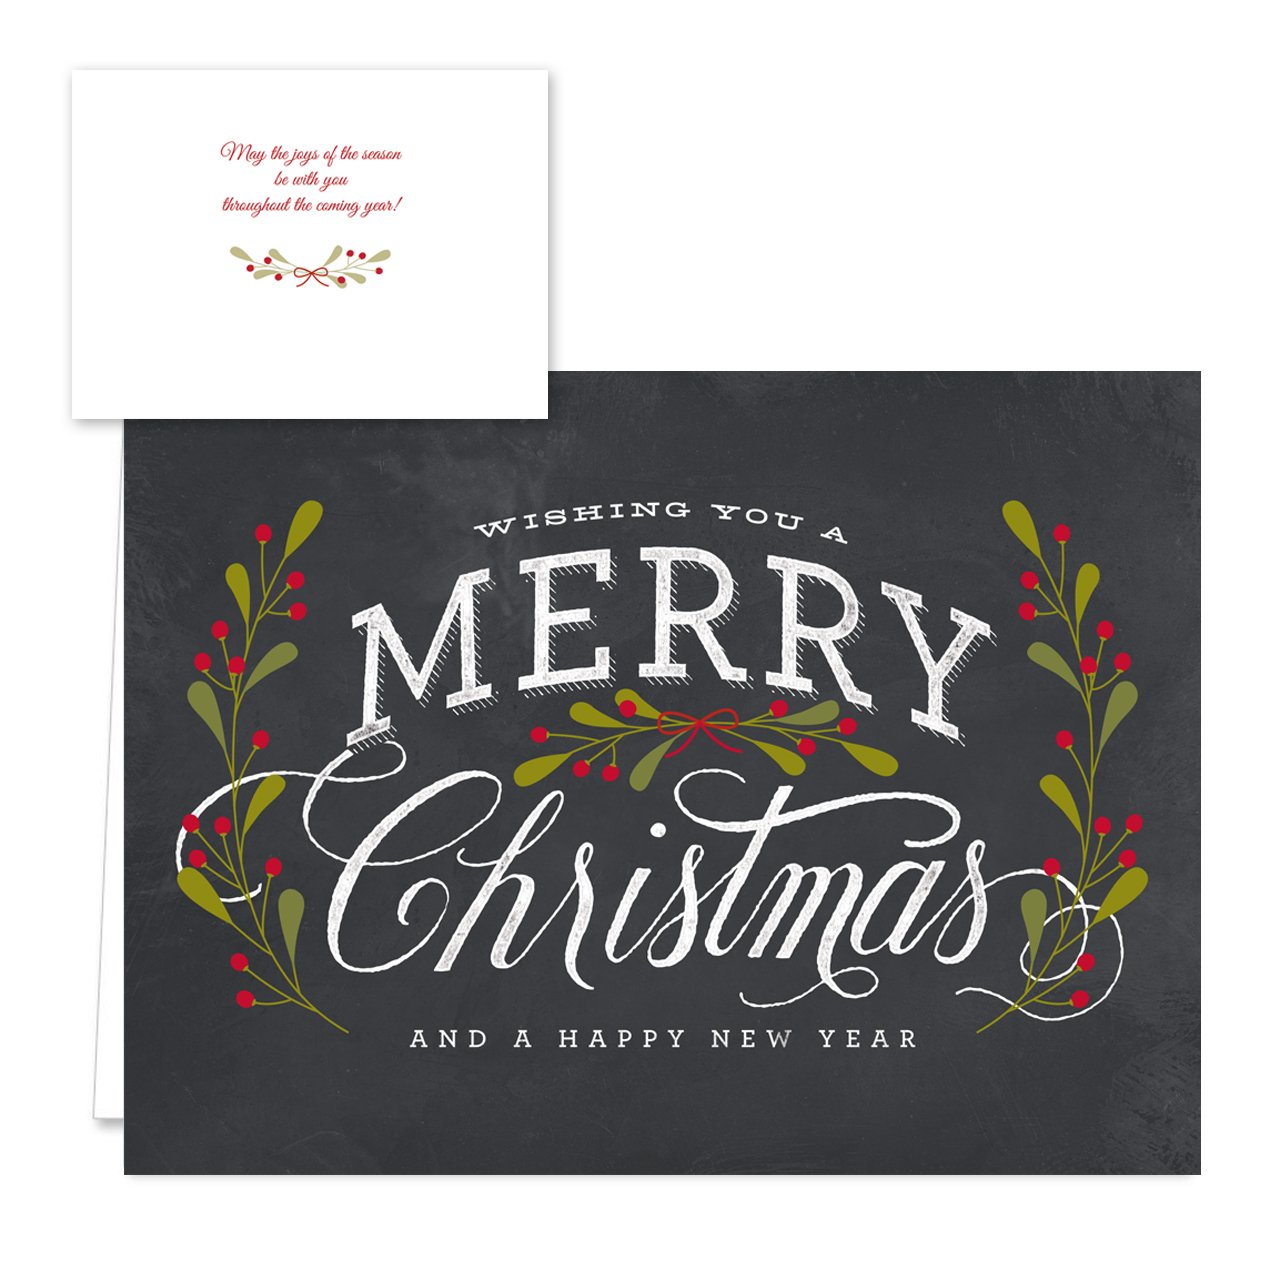 Celebrate the Season Chalkboard Christmas Card Assortment Pack / 25 Greeting Cards Set / 5 Holiday Designs Versed Inside With White Envelopes